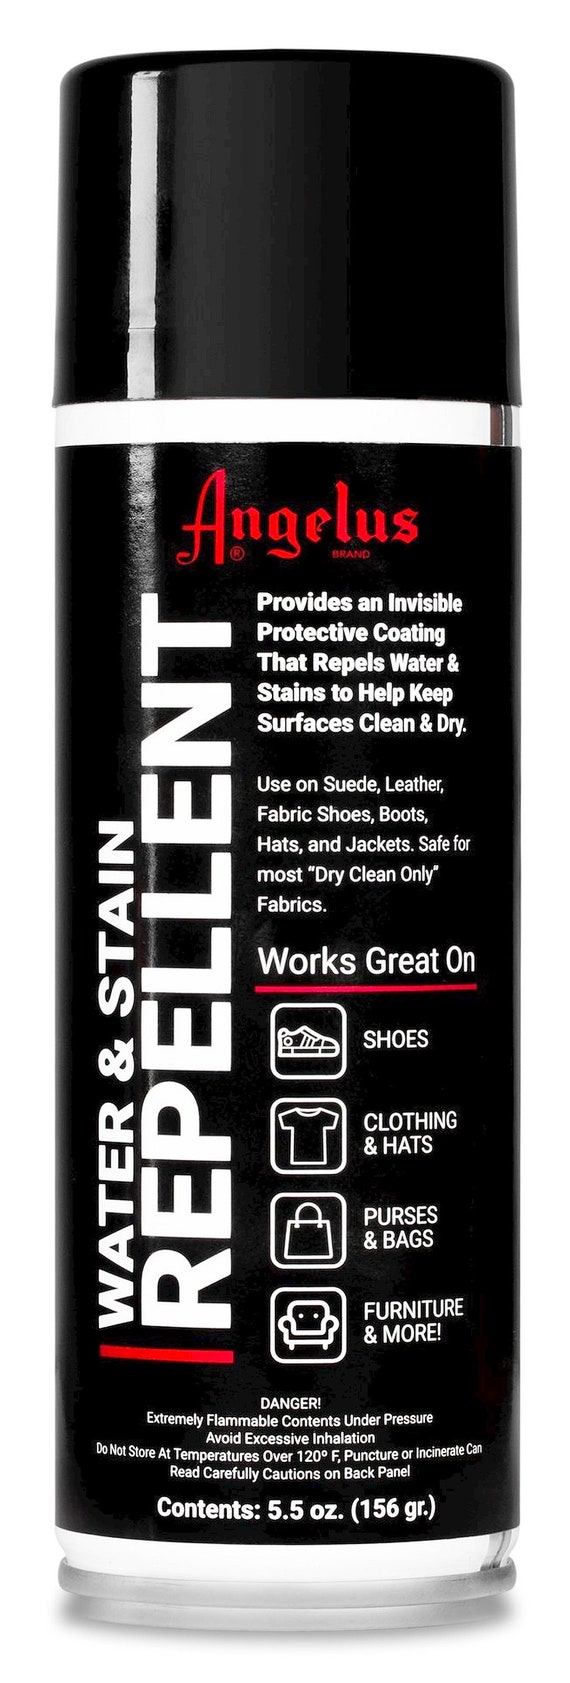 WATER REPELLENT SHOE PROTECTOR SPRAY FOR LEATHER, SUEDE, NUBUCK, STAIN  PROOF 8OZ